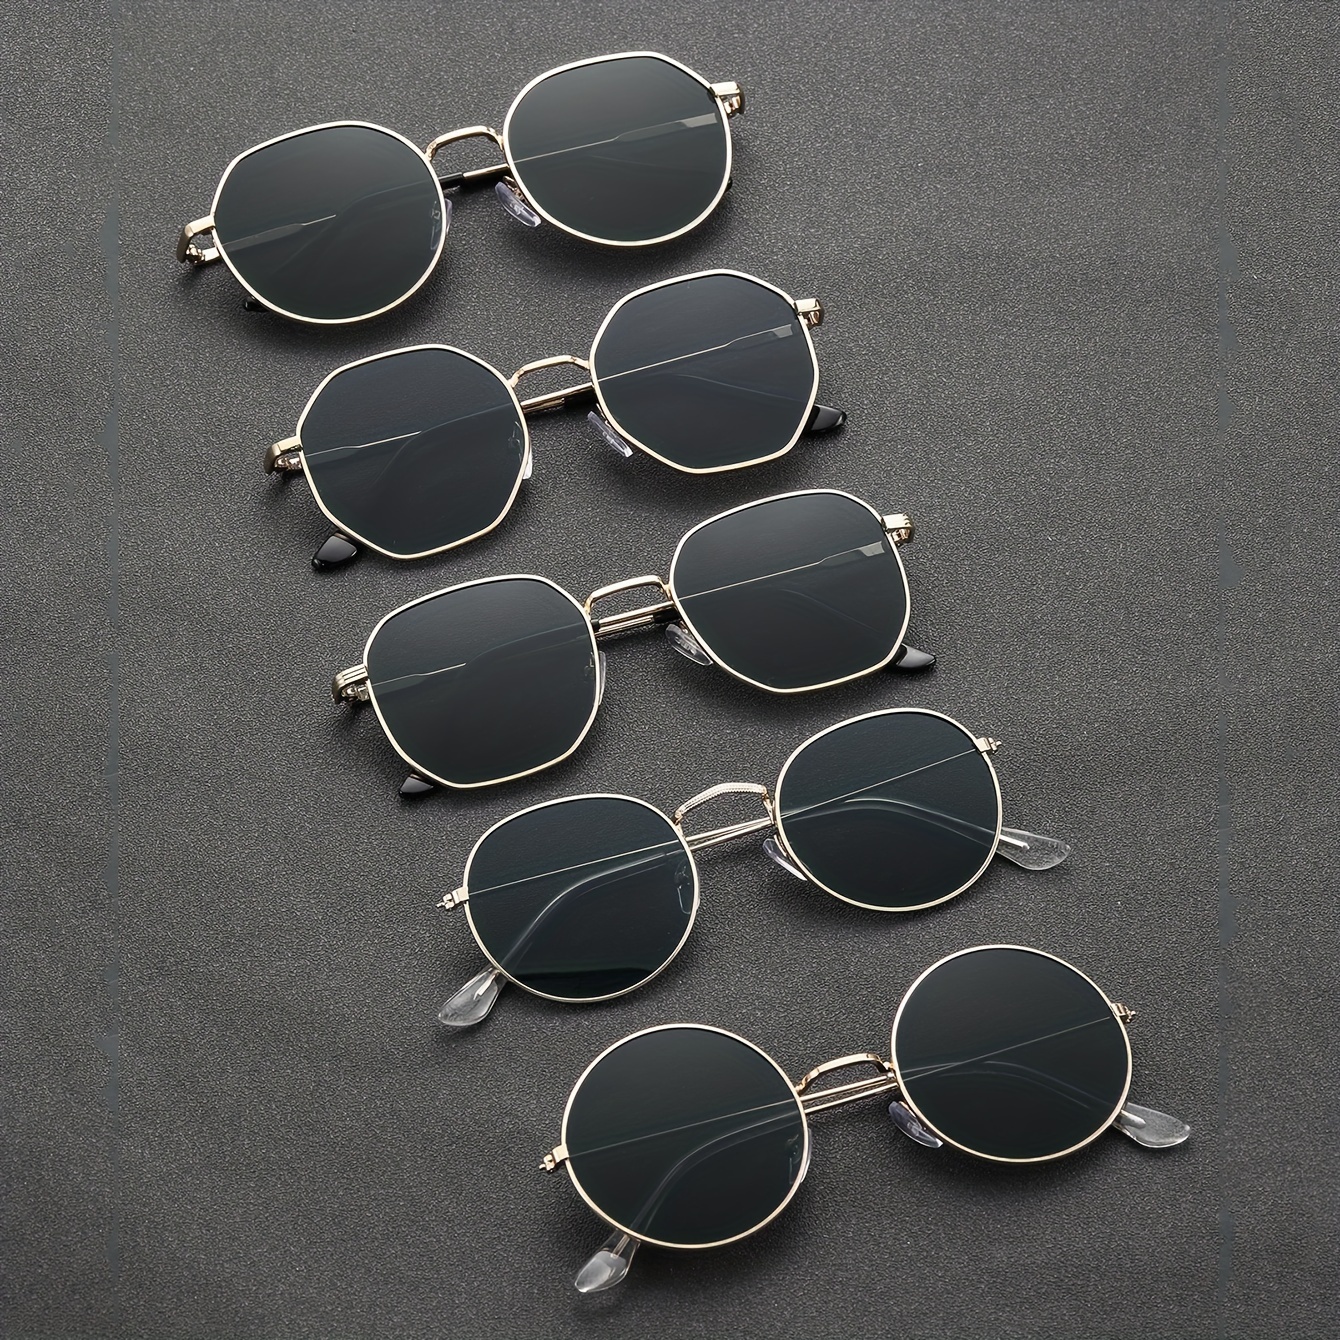 

5pcs Men's Casual Metal Oval Frame Fashionable Glasses, Trendy And Gentlemanly, For Couple Daily Life Or Vacation Outdoor Decoration